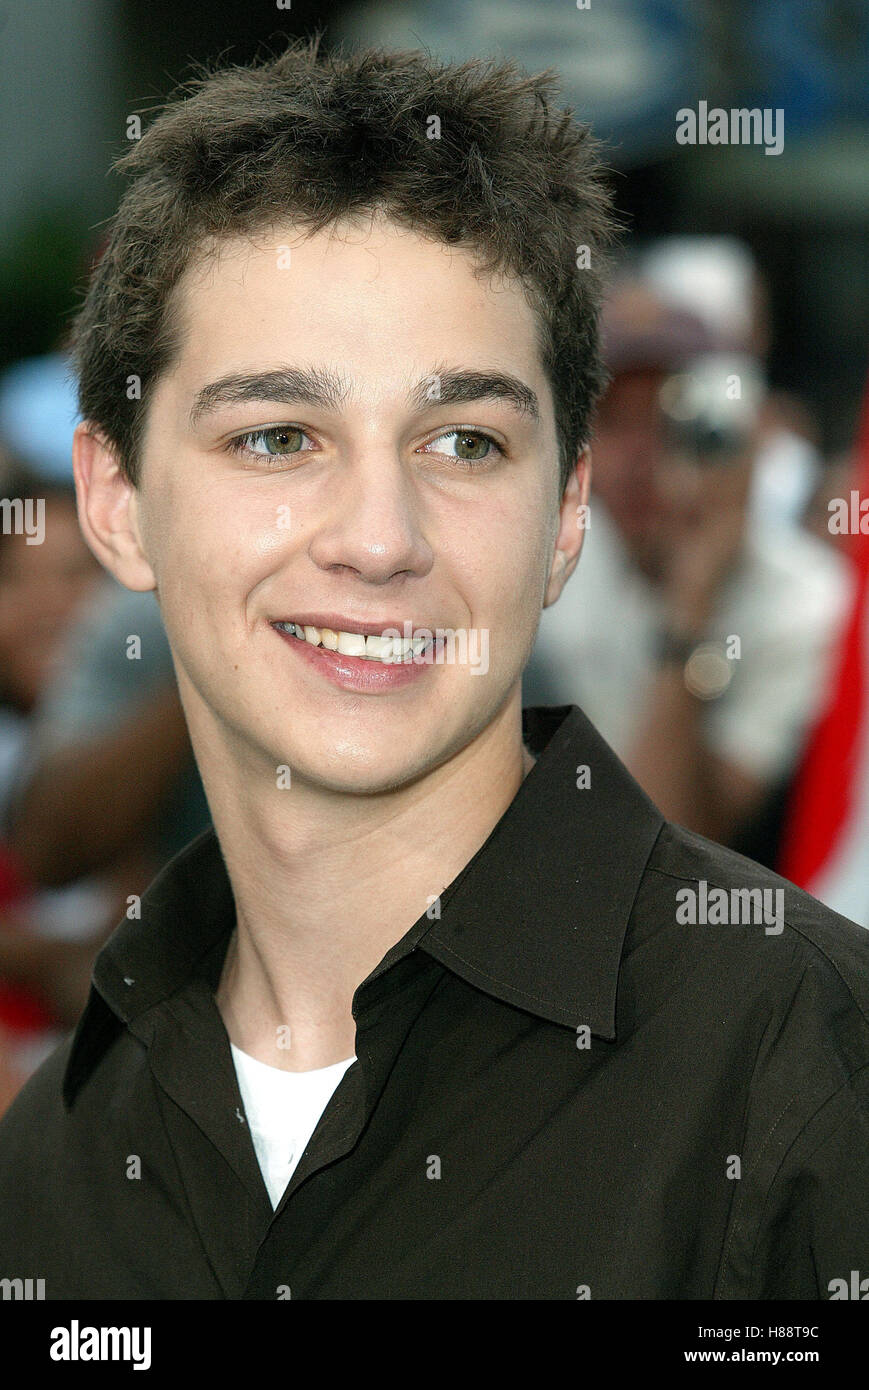 Labeouf High Resolution Stock Photography and Images - Alamy